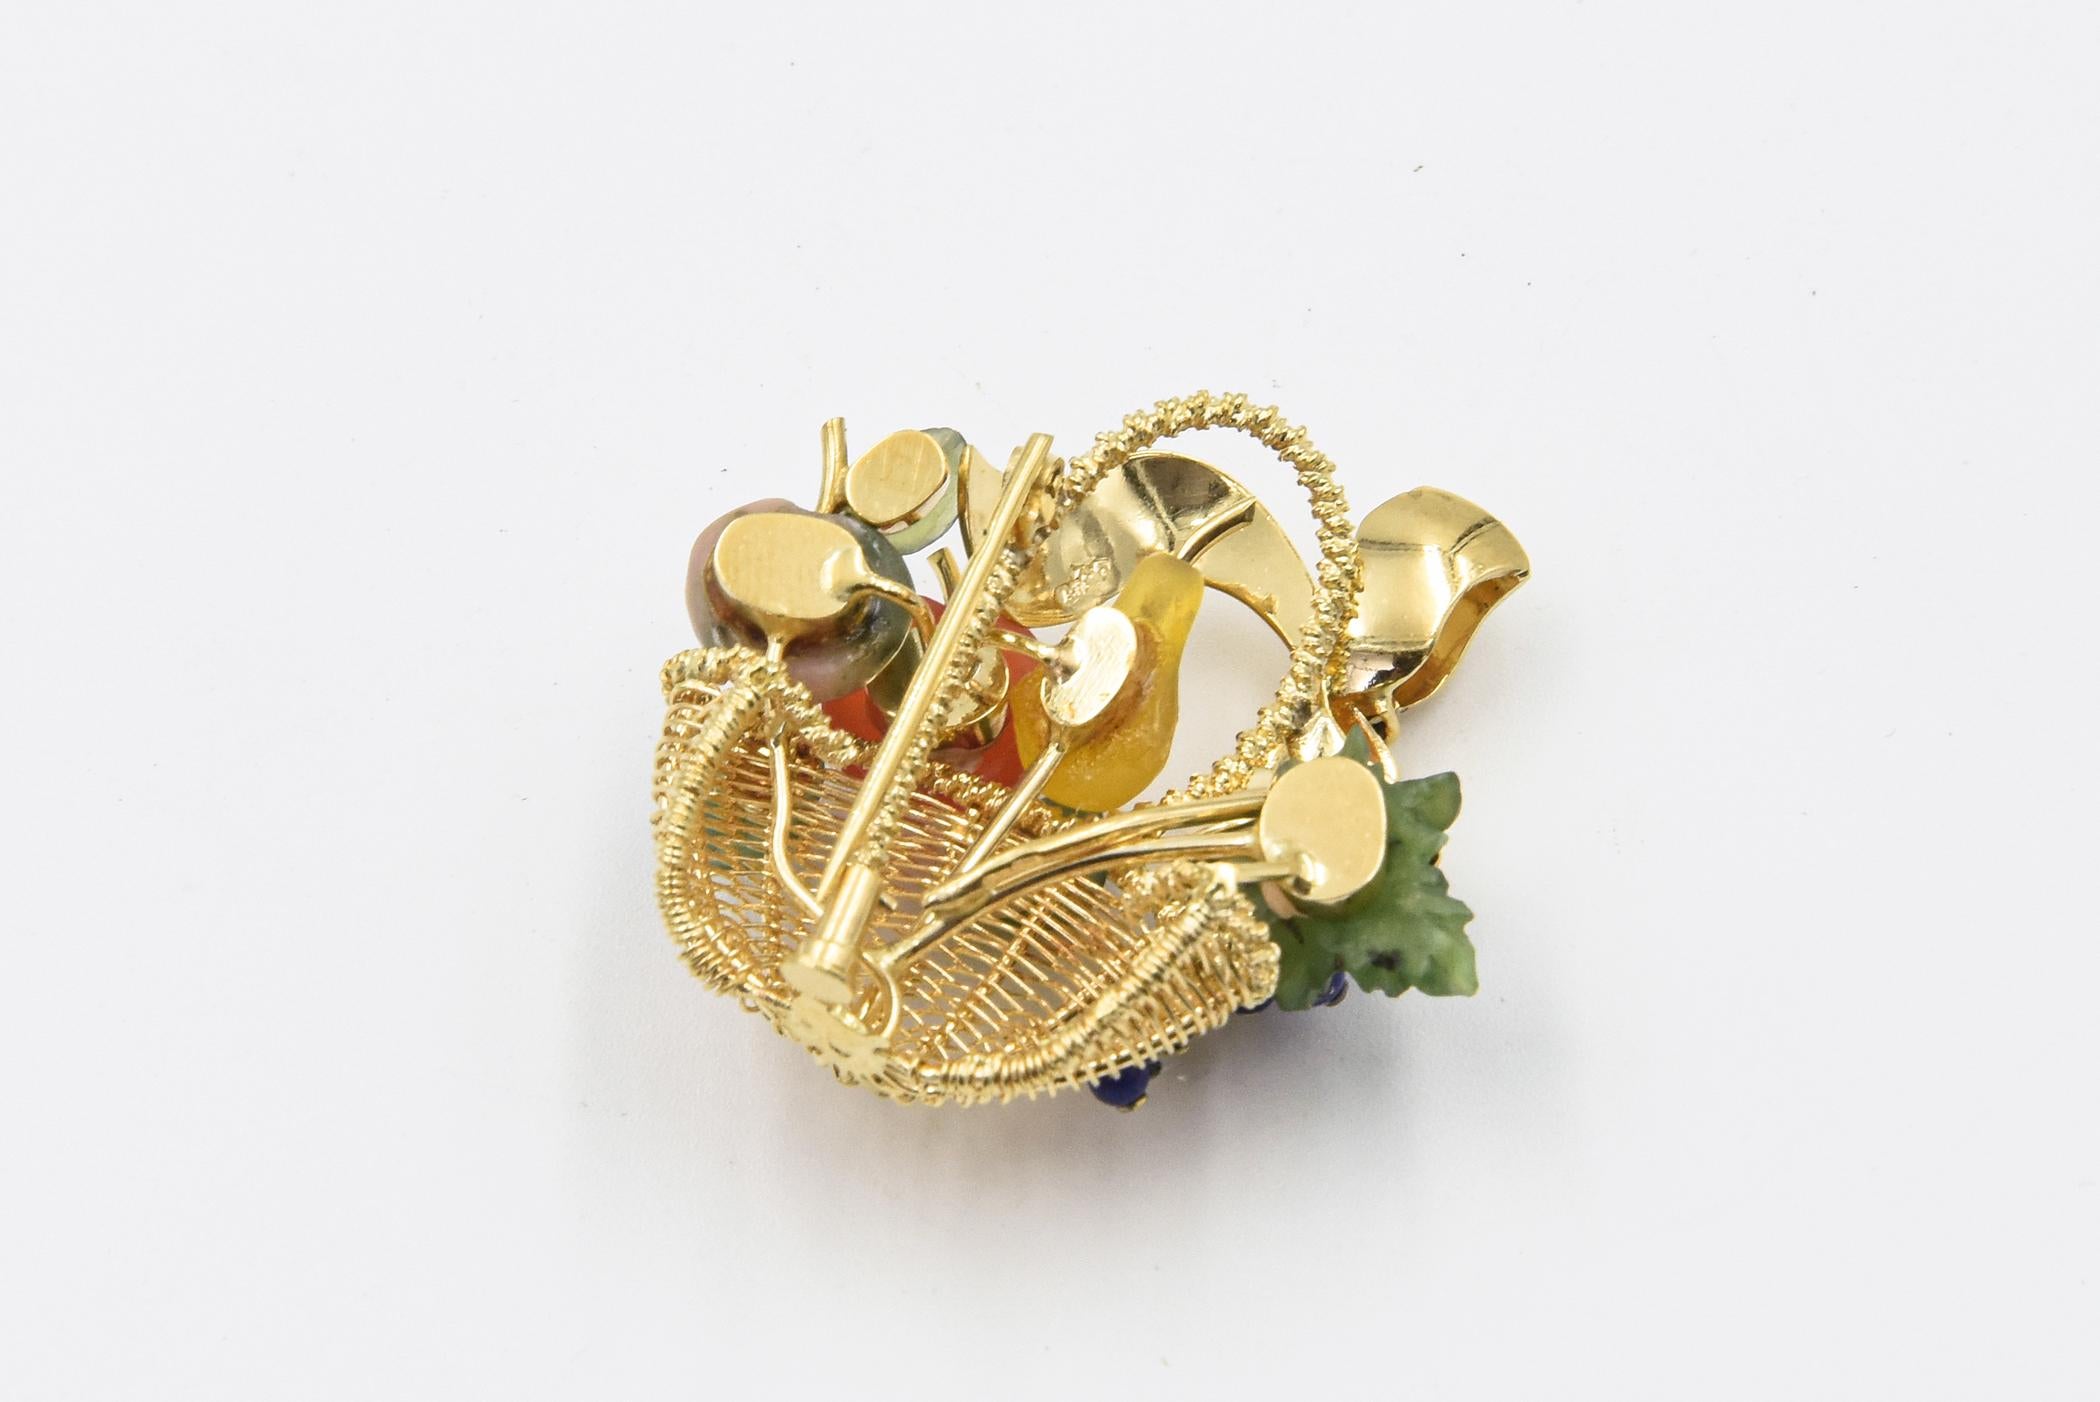 Gemstone Fruit Basket Woven Yellow Gold Brooch with Bow Handle In Good Condition For Sale In Miami Beach, FL